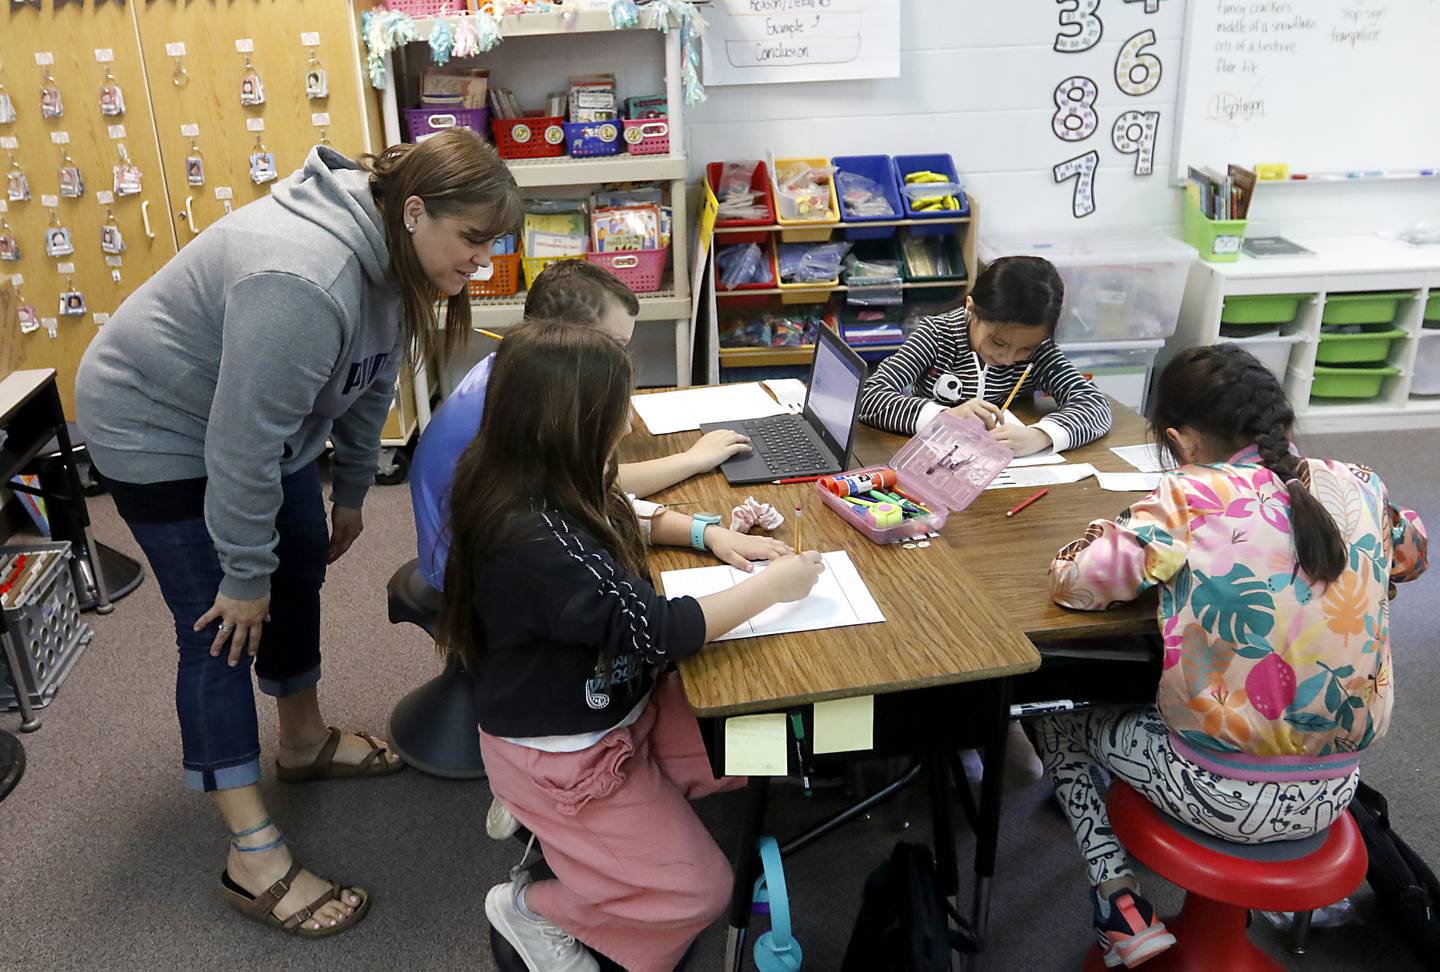 Zoki Russo, a third grade teacher at Sleepy Hollow Elementary School, works with students as she teaches her class.